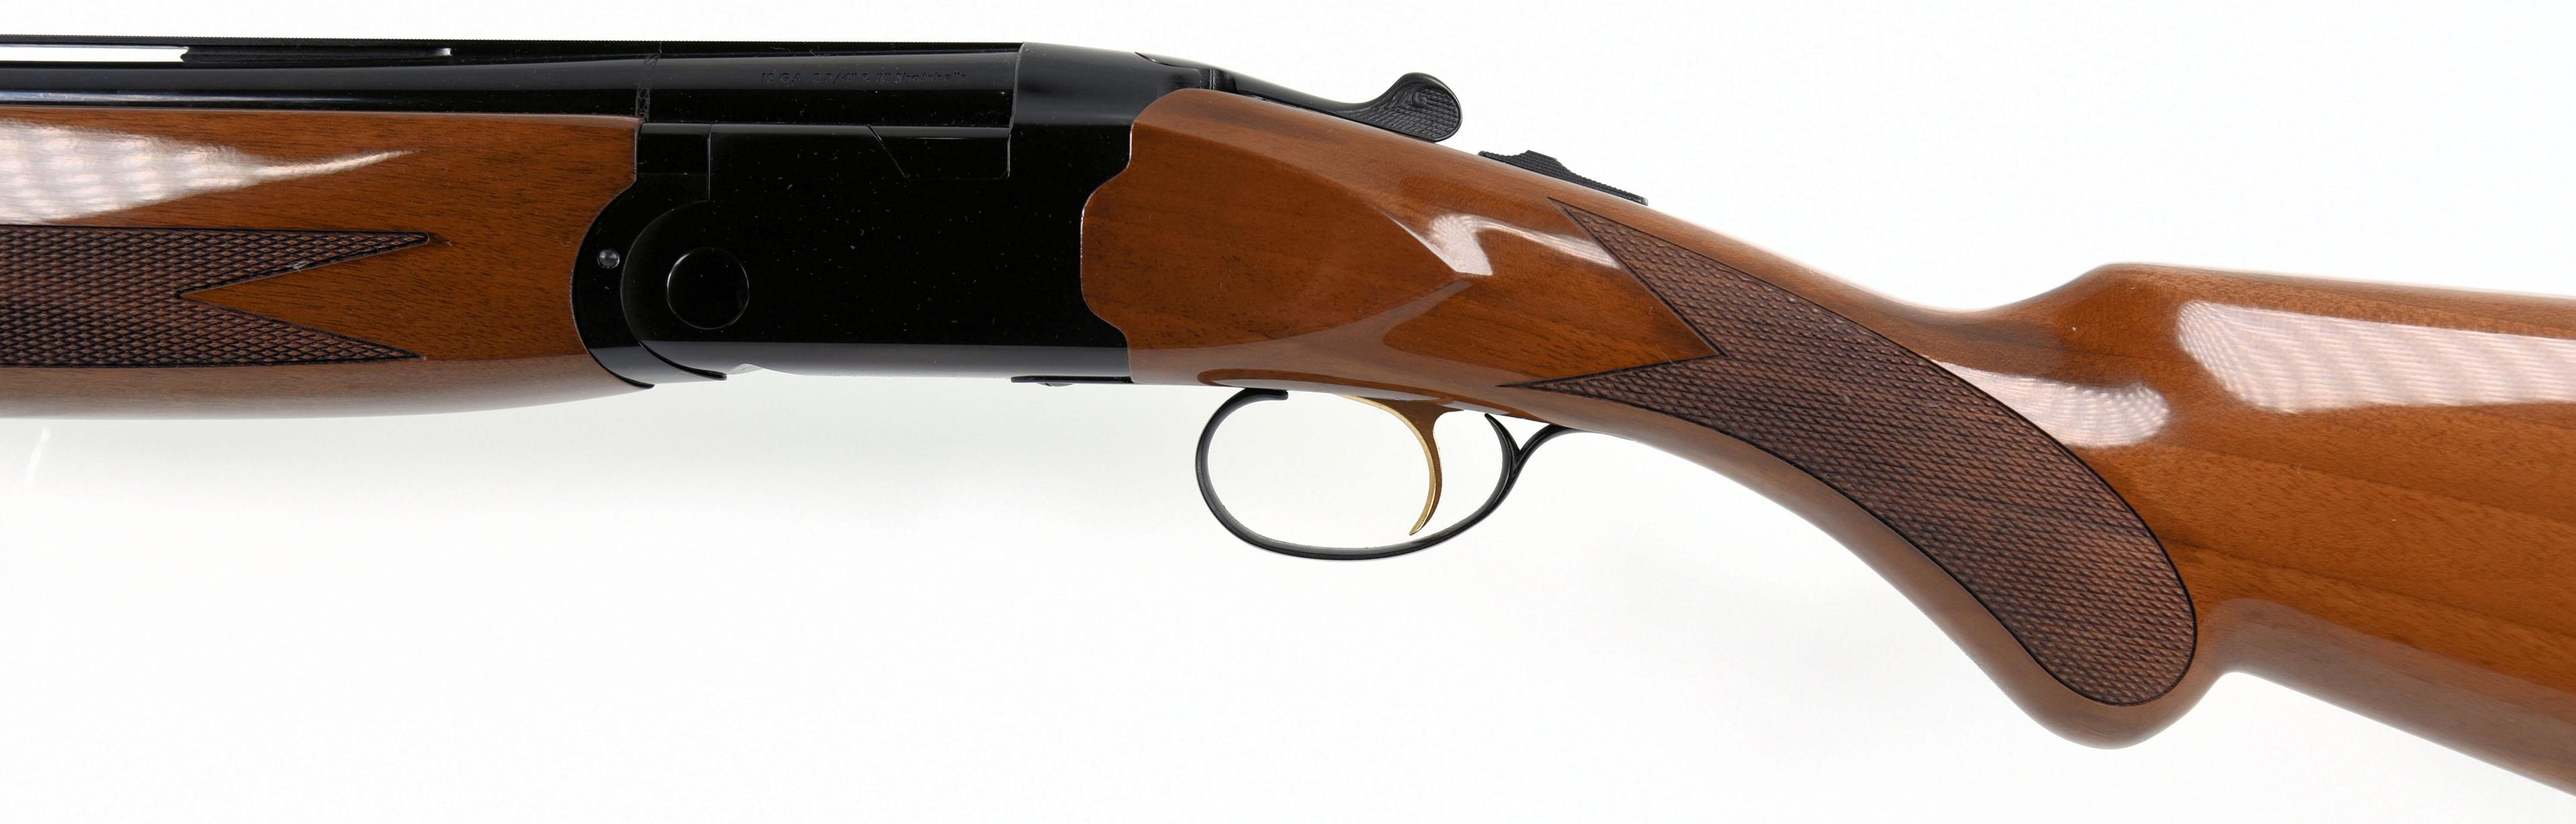 ATA Silah Sanay;/Imp by Weatherby Orion Over Under Shotgun